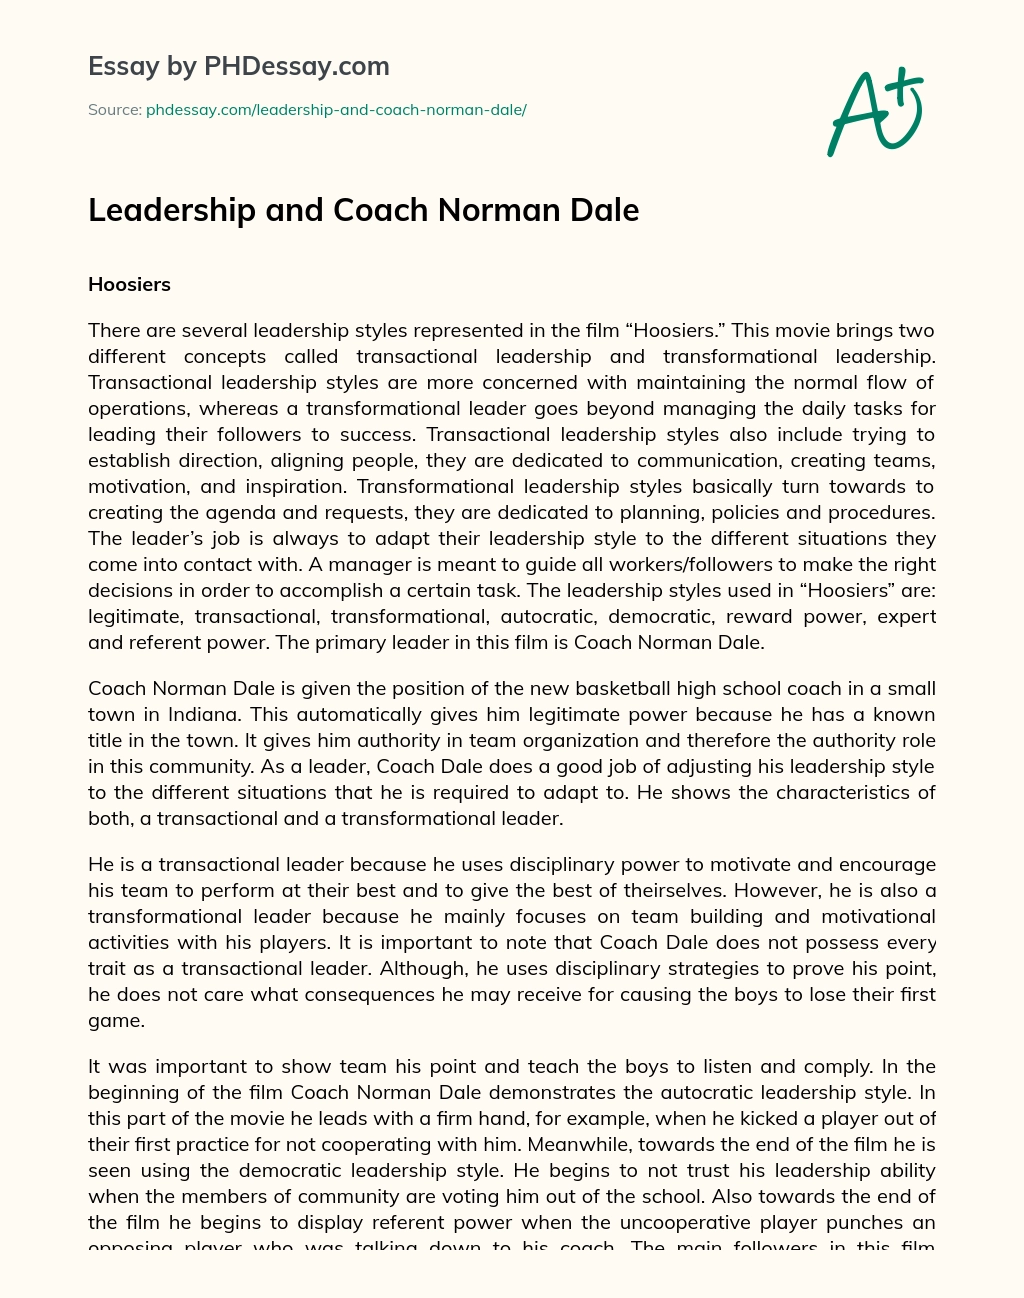 Leadership and Coach Norman Dale essay